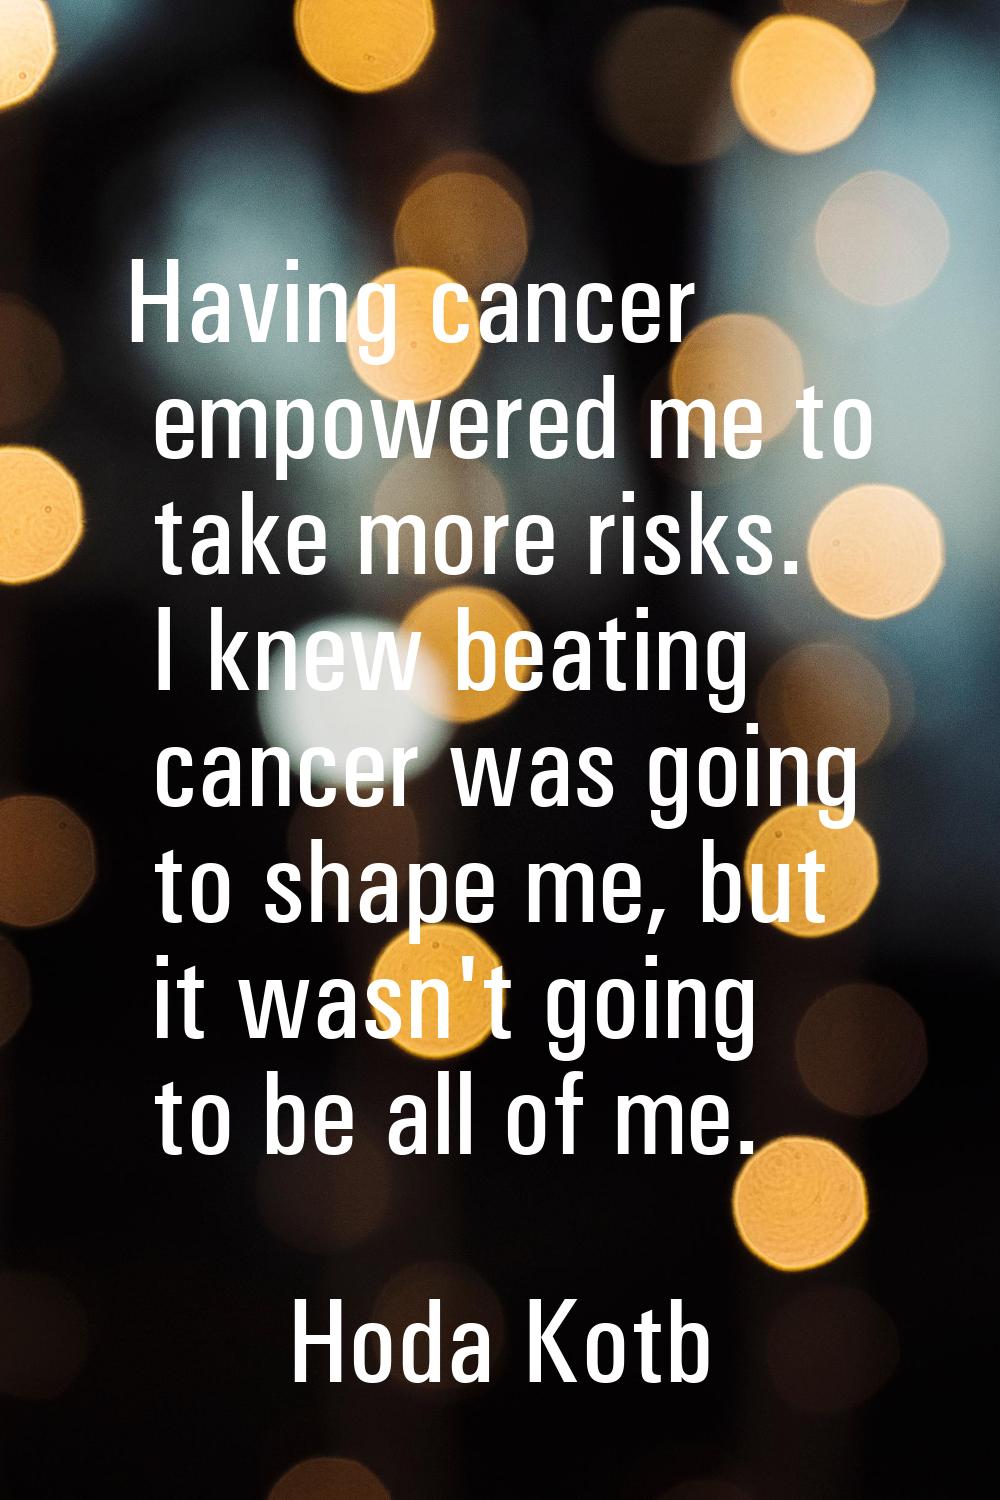 Having cancer empowered me to take more risks. I knew beating cancer was going to shape me, but it 